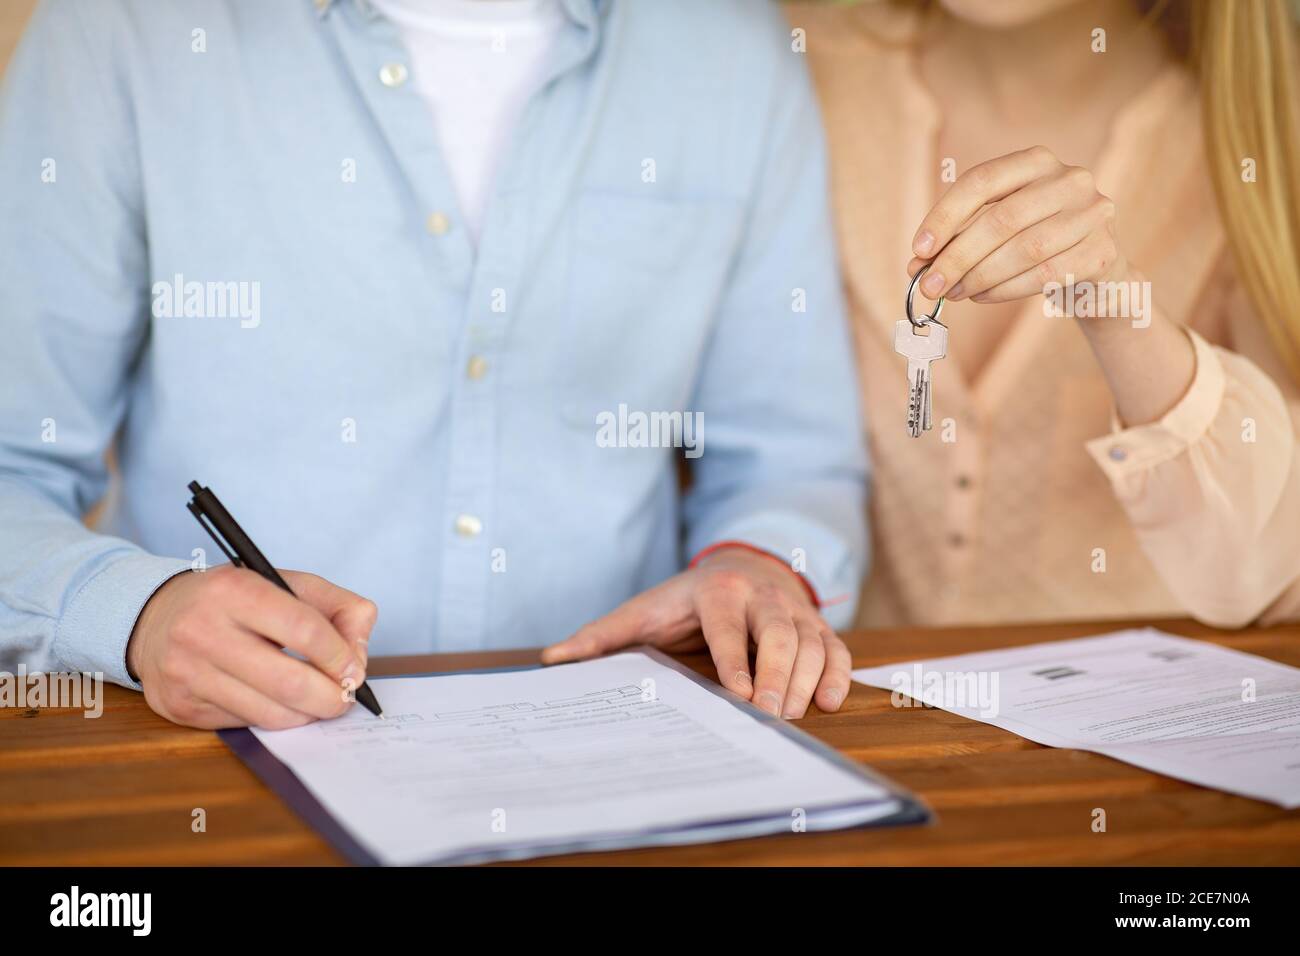 Cropped view of young couple with house key signing real estate purchase agreement at table, close up Stock Photo